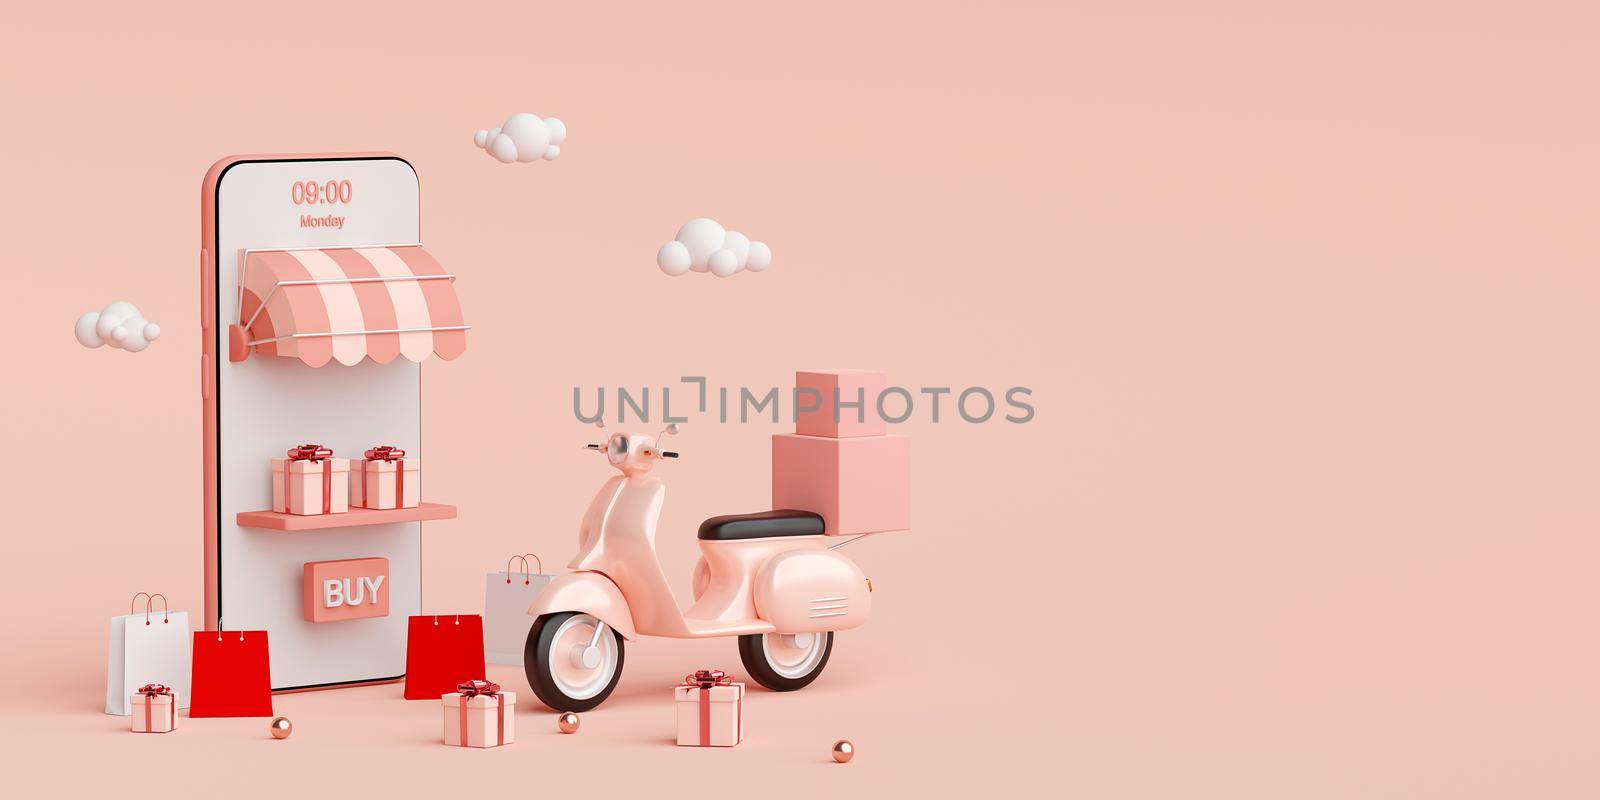 E-commerce concept, Delivery service on mobile application, Transportation or food delivery by scooter, 3d rendering by nutzchotwarut